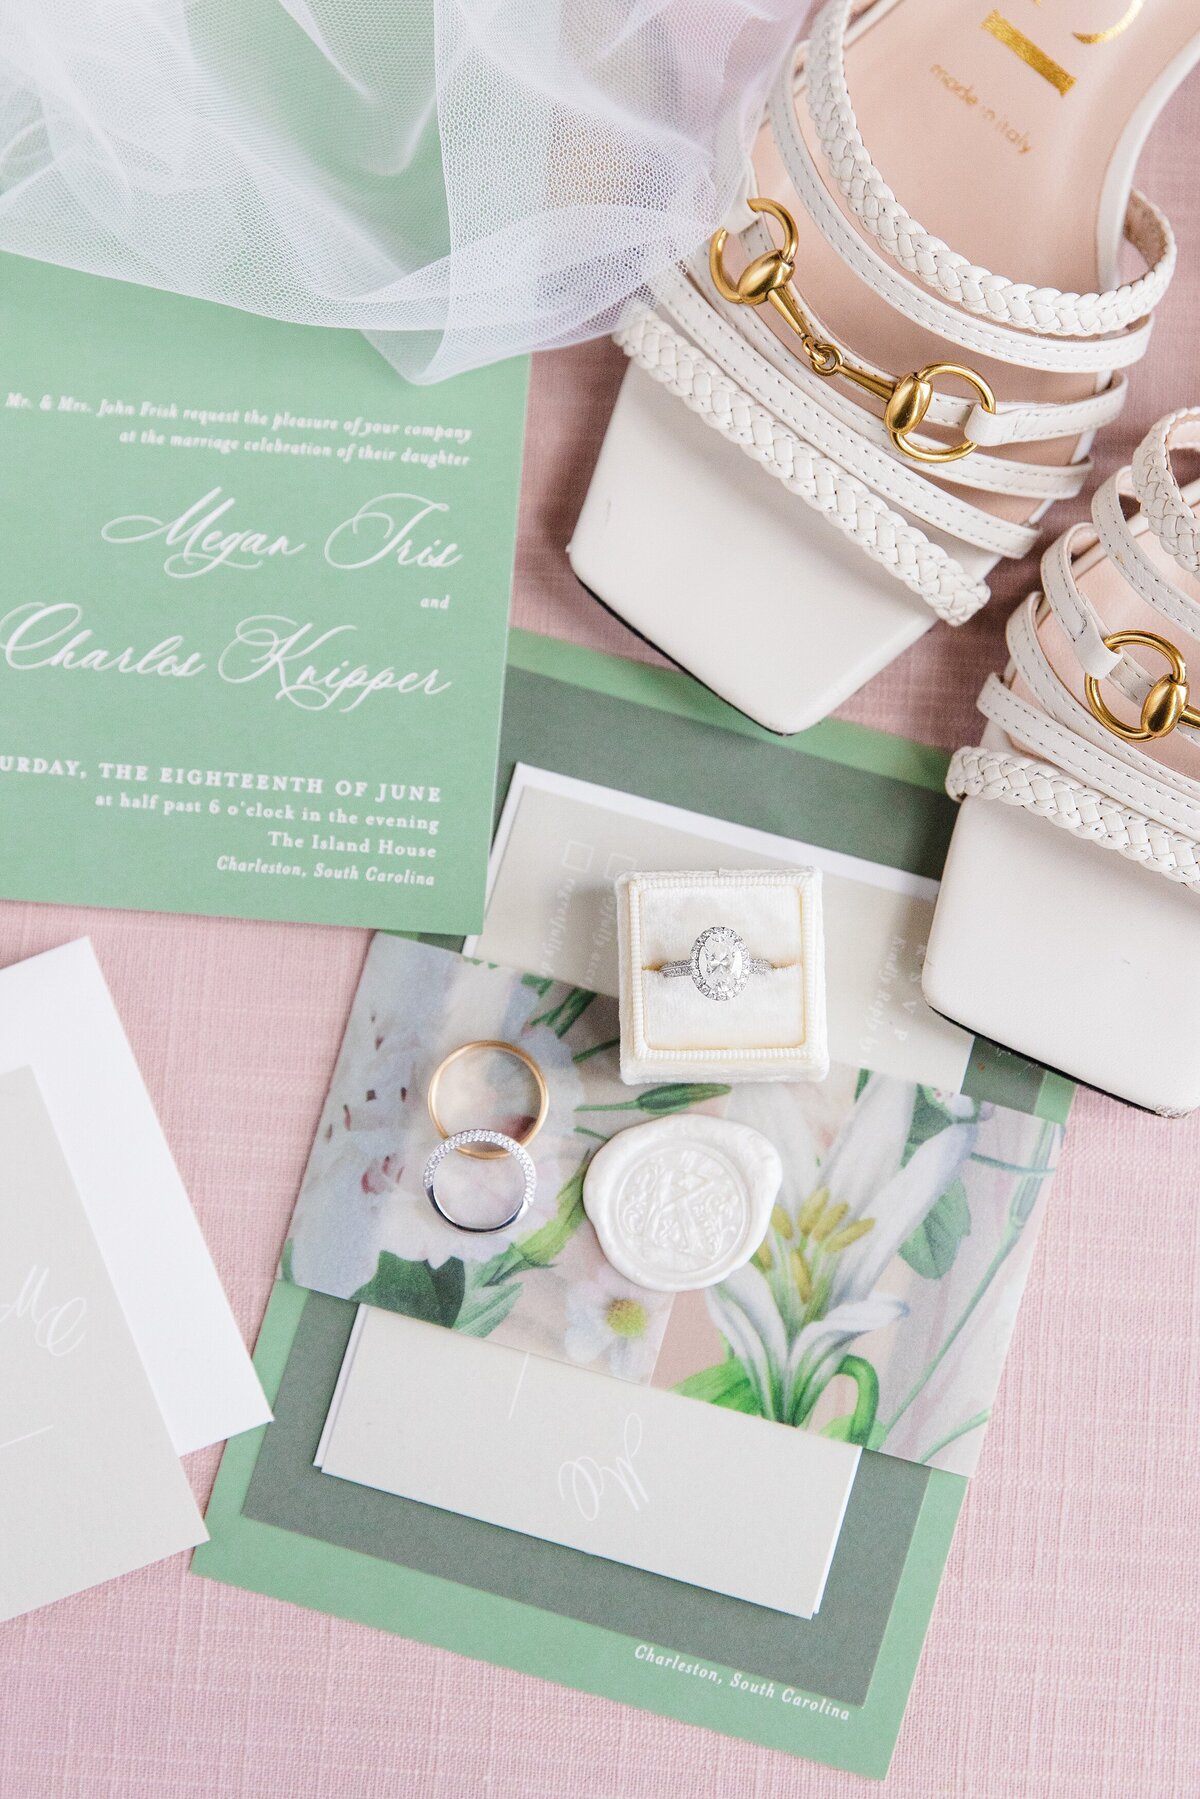 detail photo of invitation suite, bride's shoes, rings, and veil